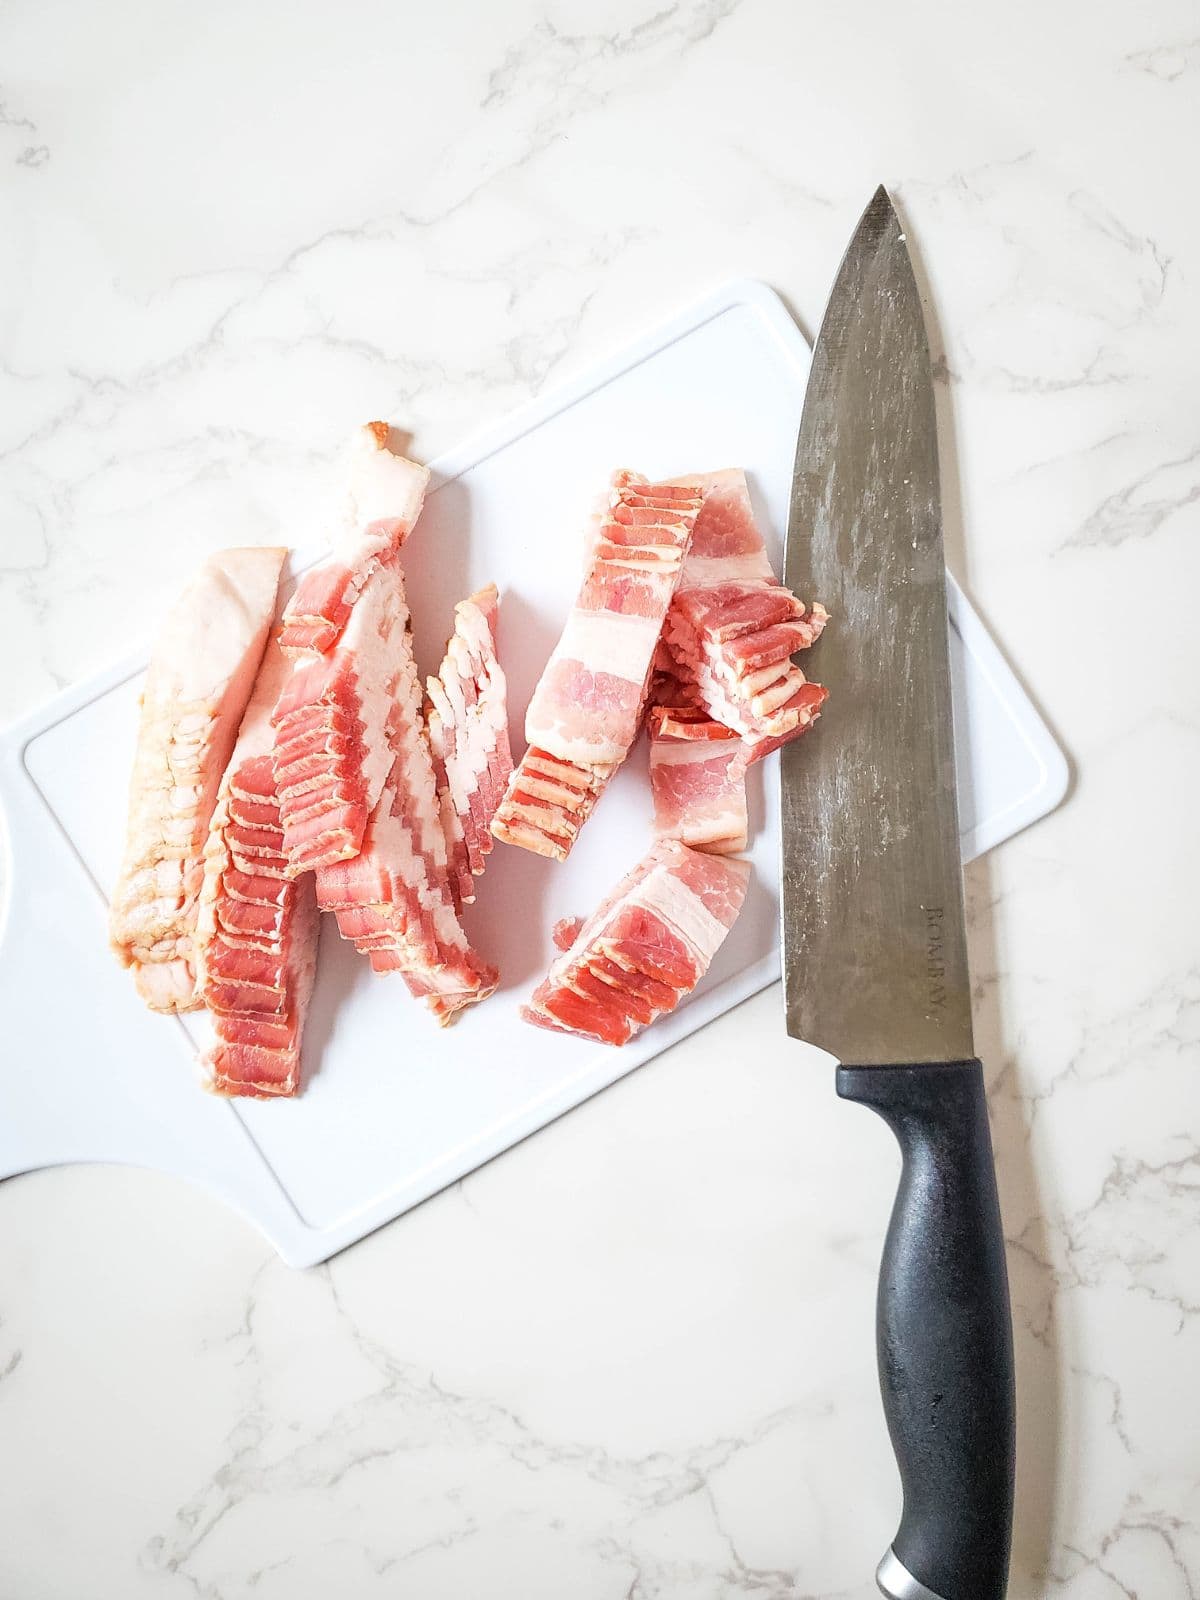 chopped bacon on cutting board with knife.